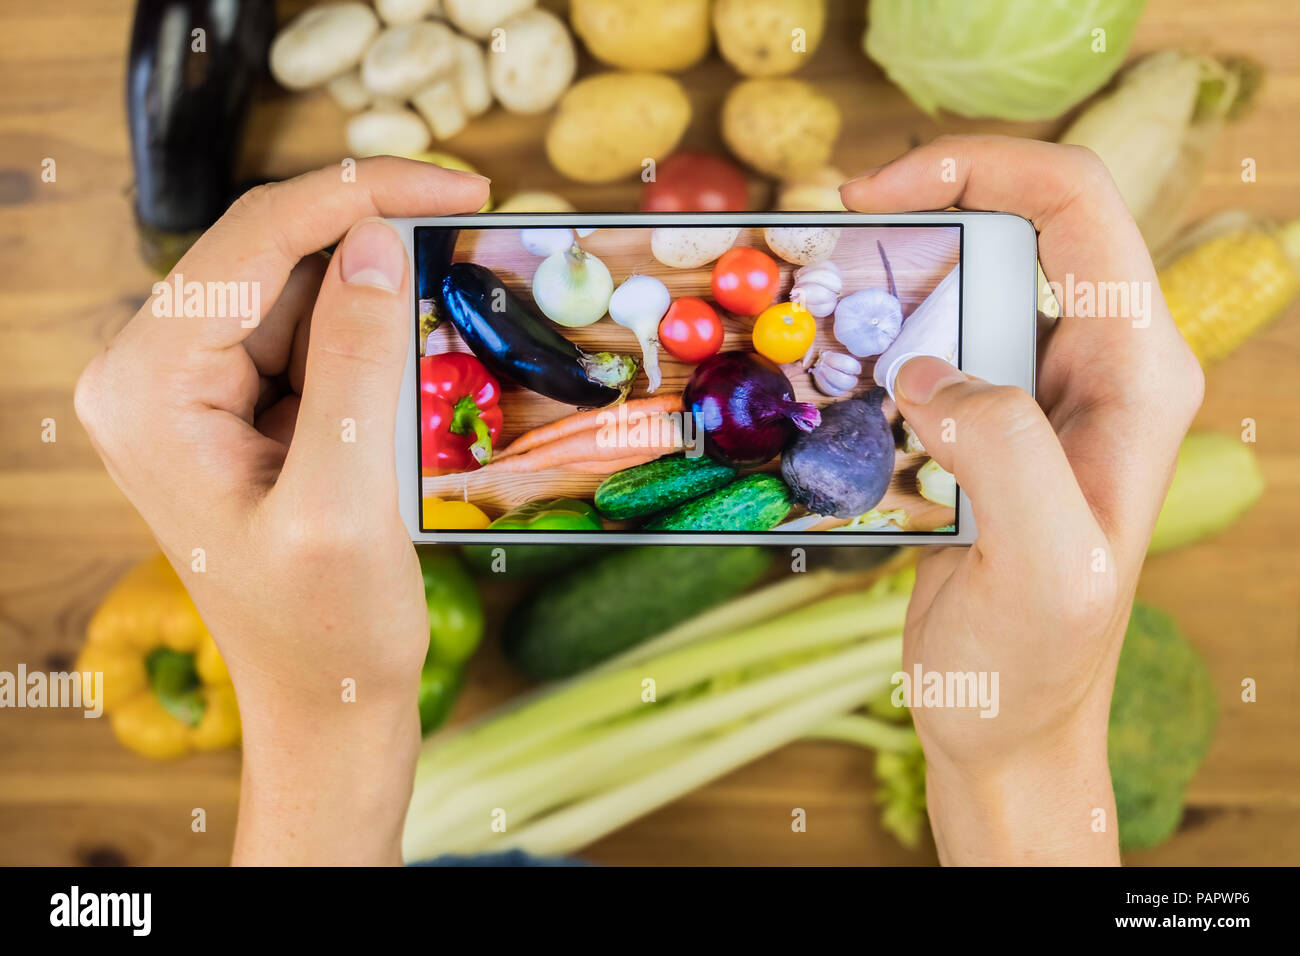 Taking photo of fresh organic vegetables on rustic wood table, top view. Close-up of female hands photographing flat lay of locally grown natural vega Stock Photo